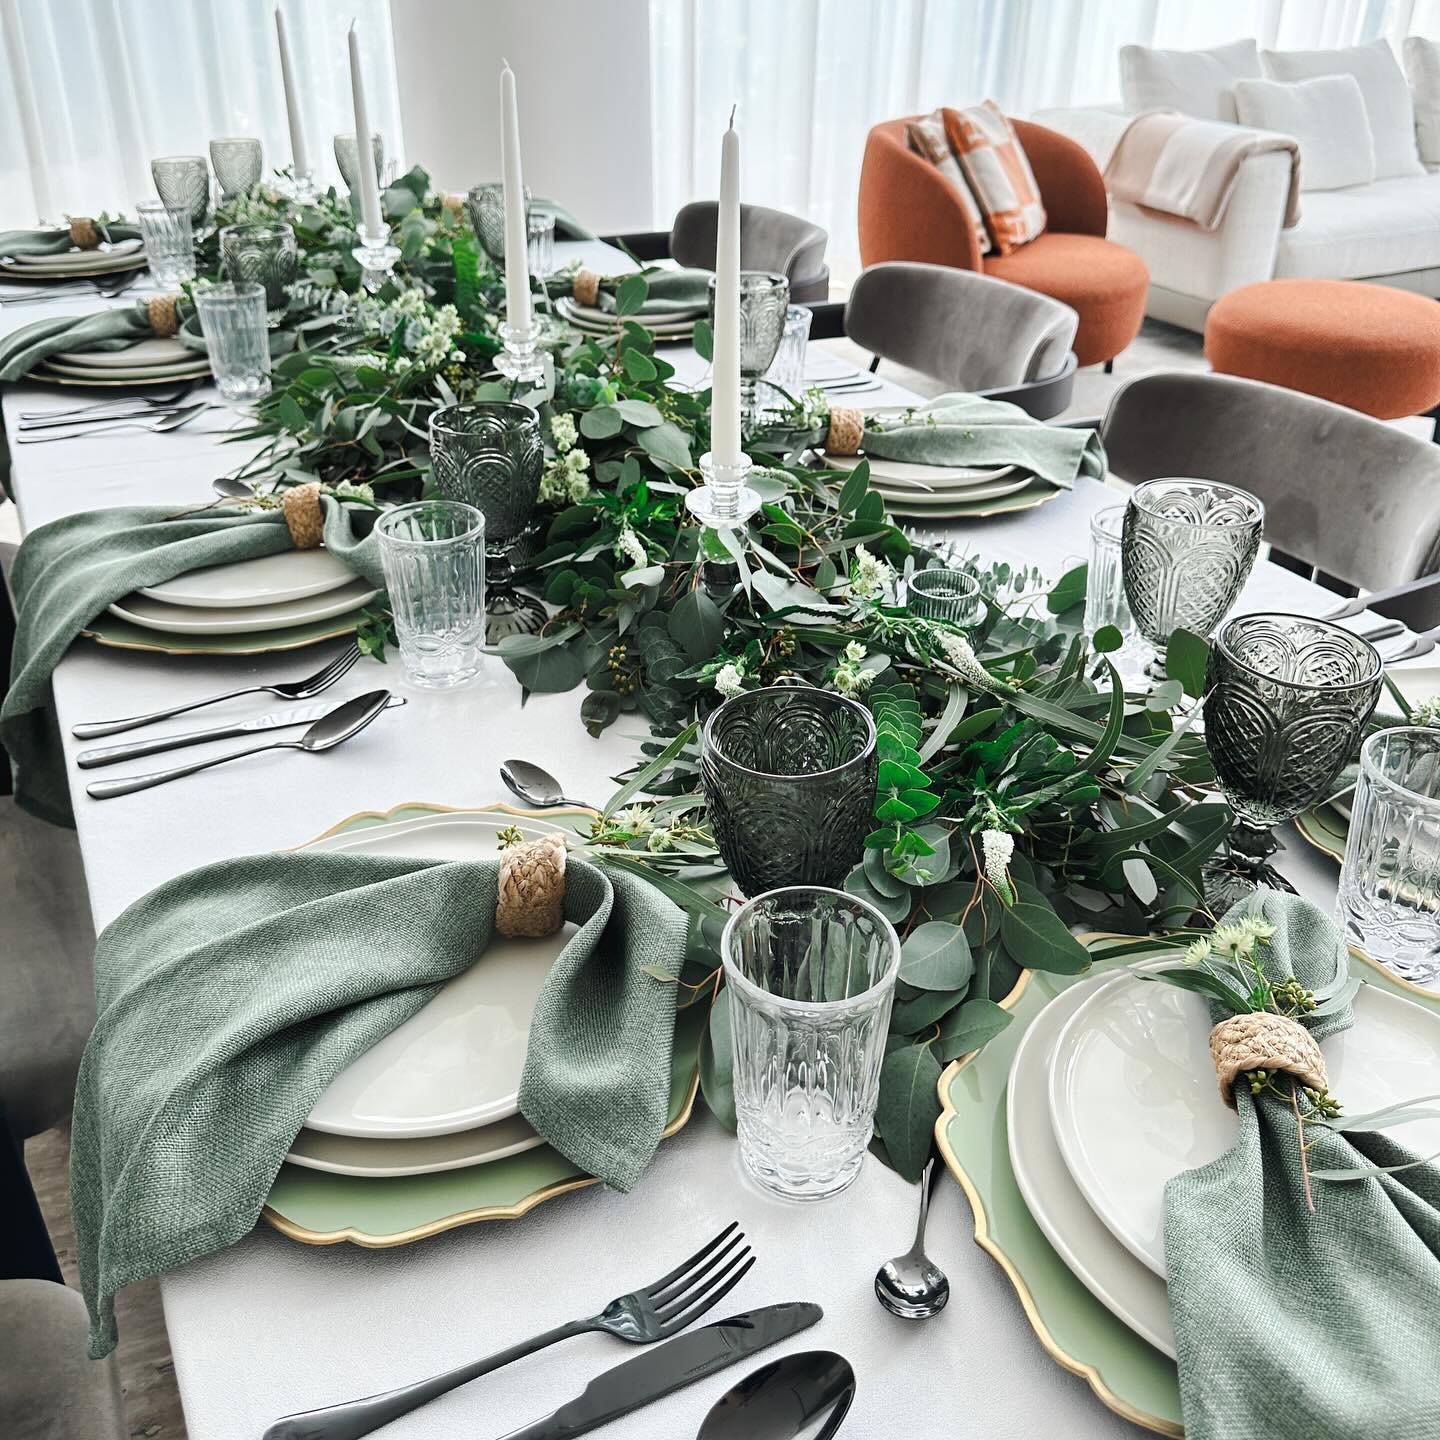 Our latest exquisite table styling, a lush eucalyptus foliage runner and striking sage green accents.

Trust us for all your table styling needs, from bridal showers to weddings and corporate event.

Let Estilo &amp; Co Events transform your event in